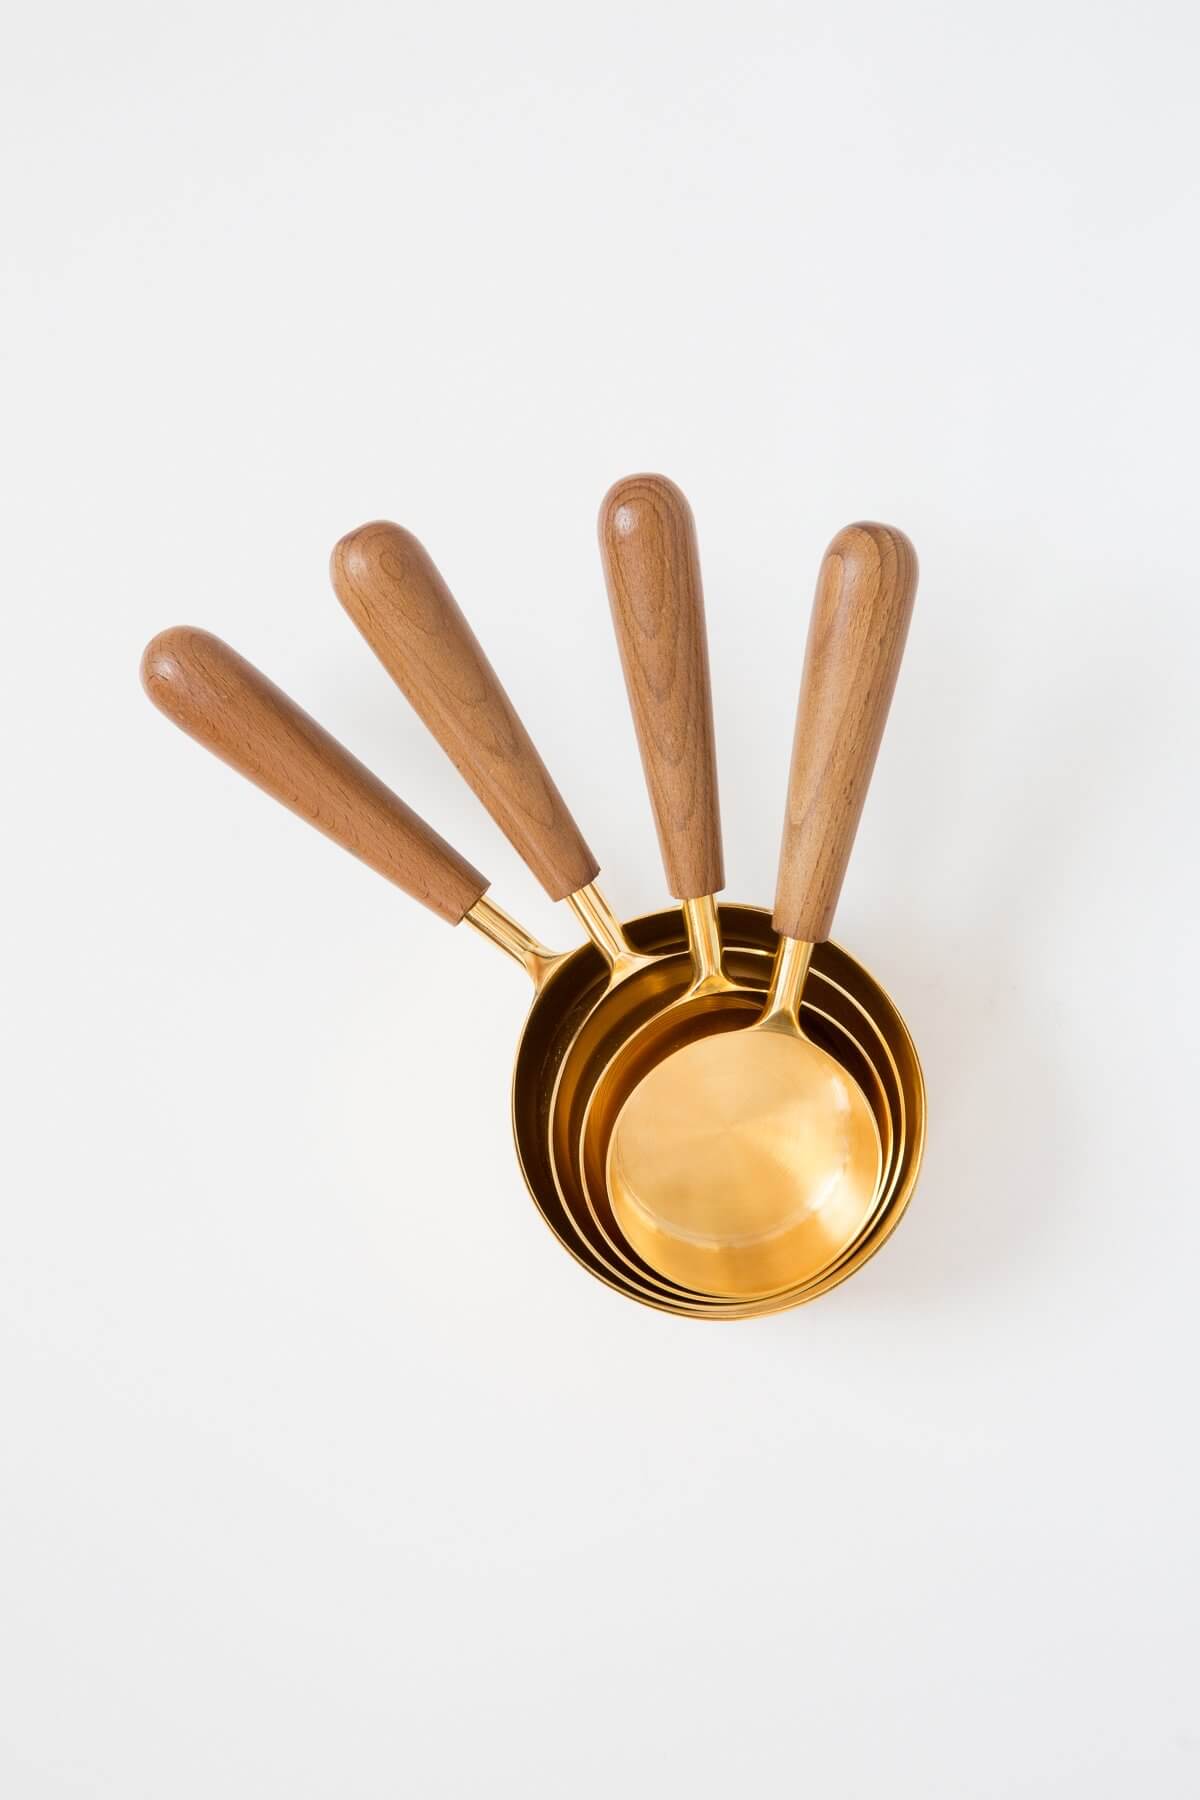 Draper Wood and Gold Measuring Cups and Spoons Set